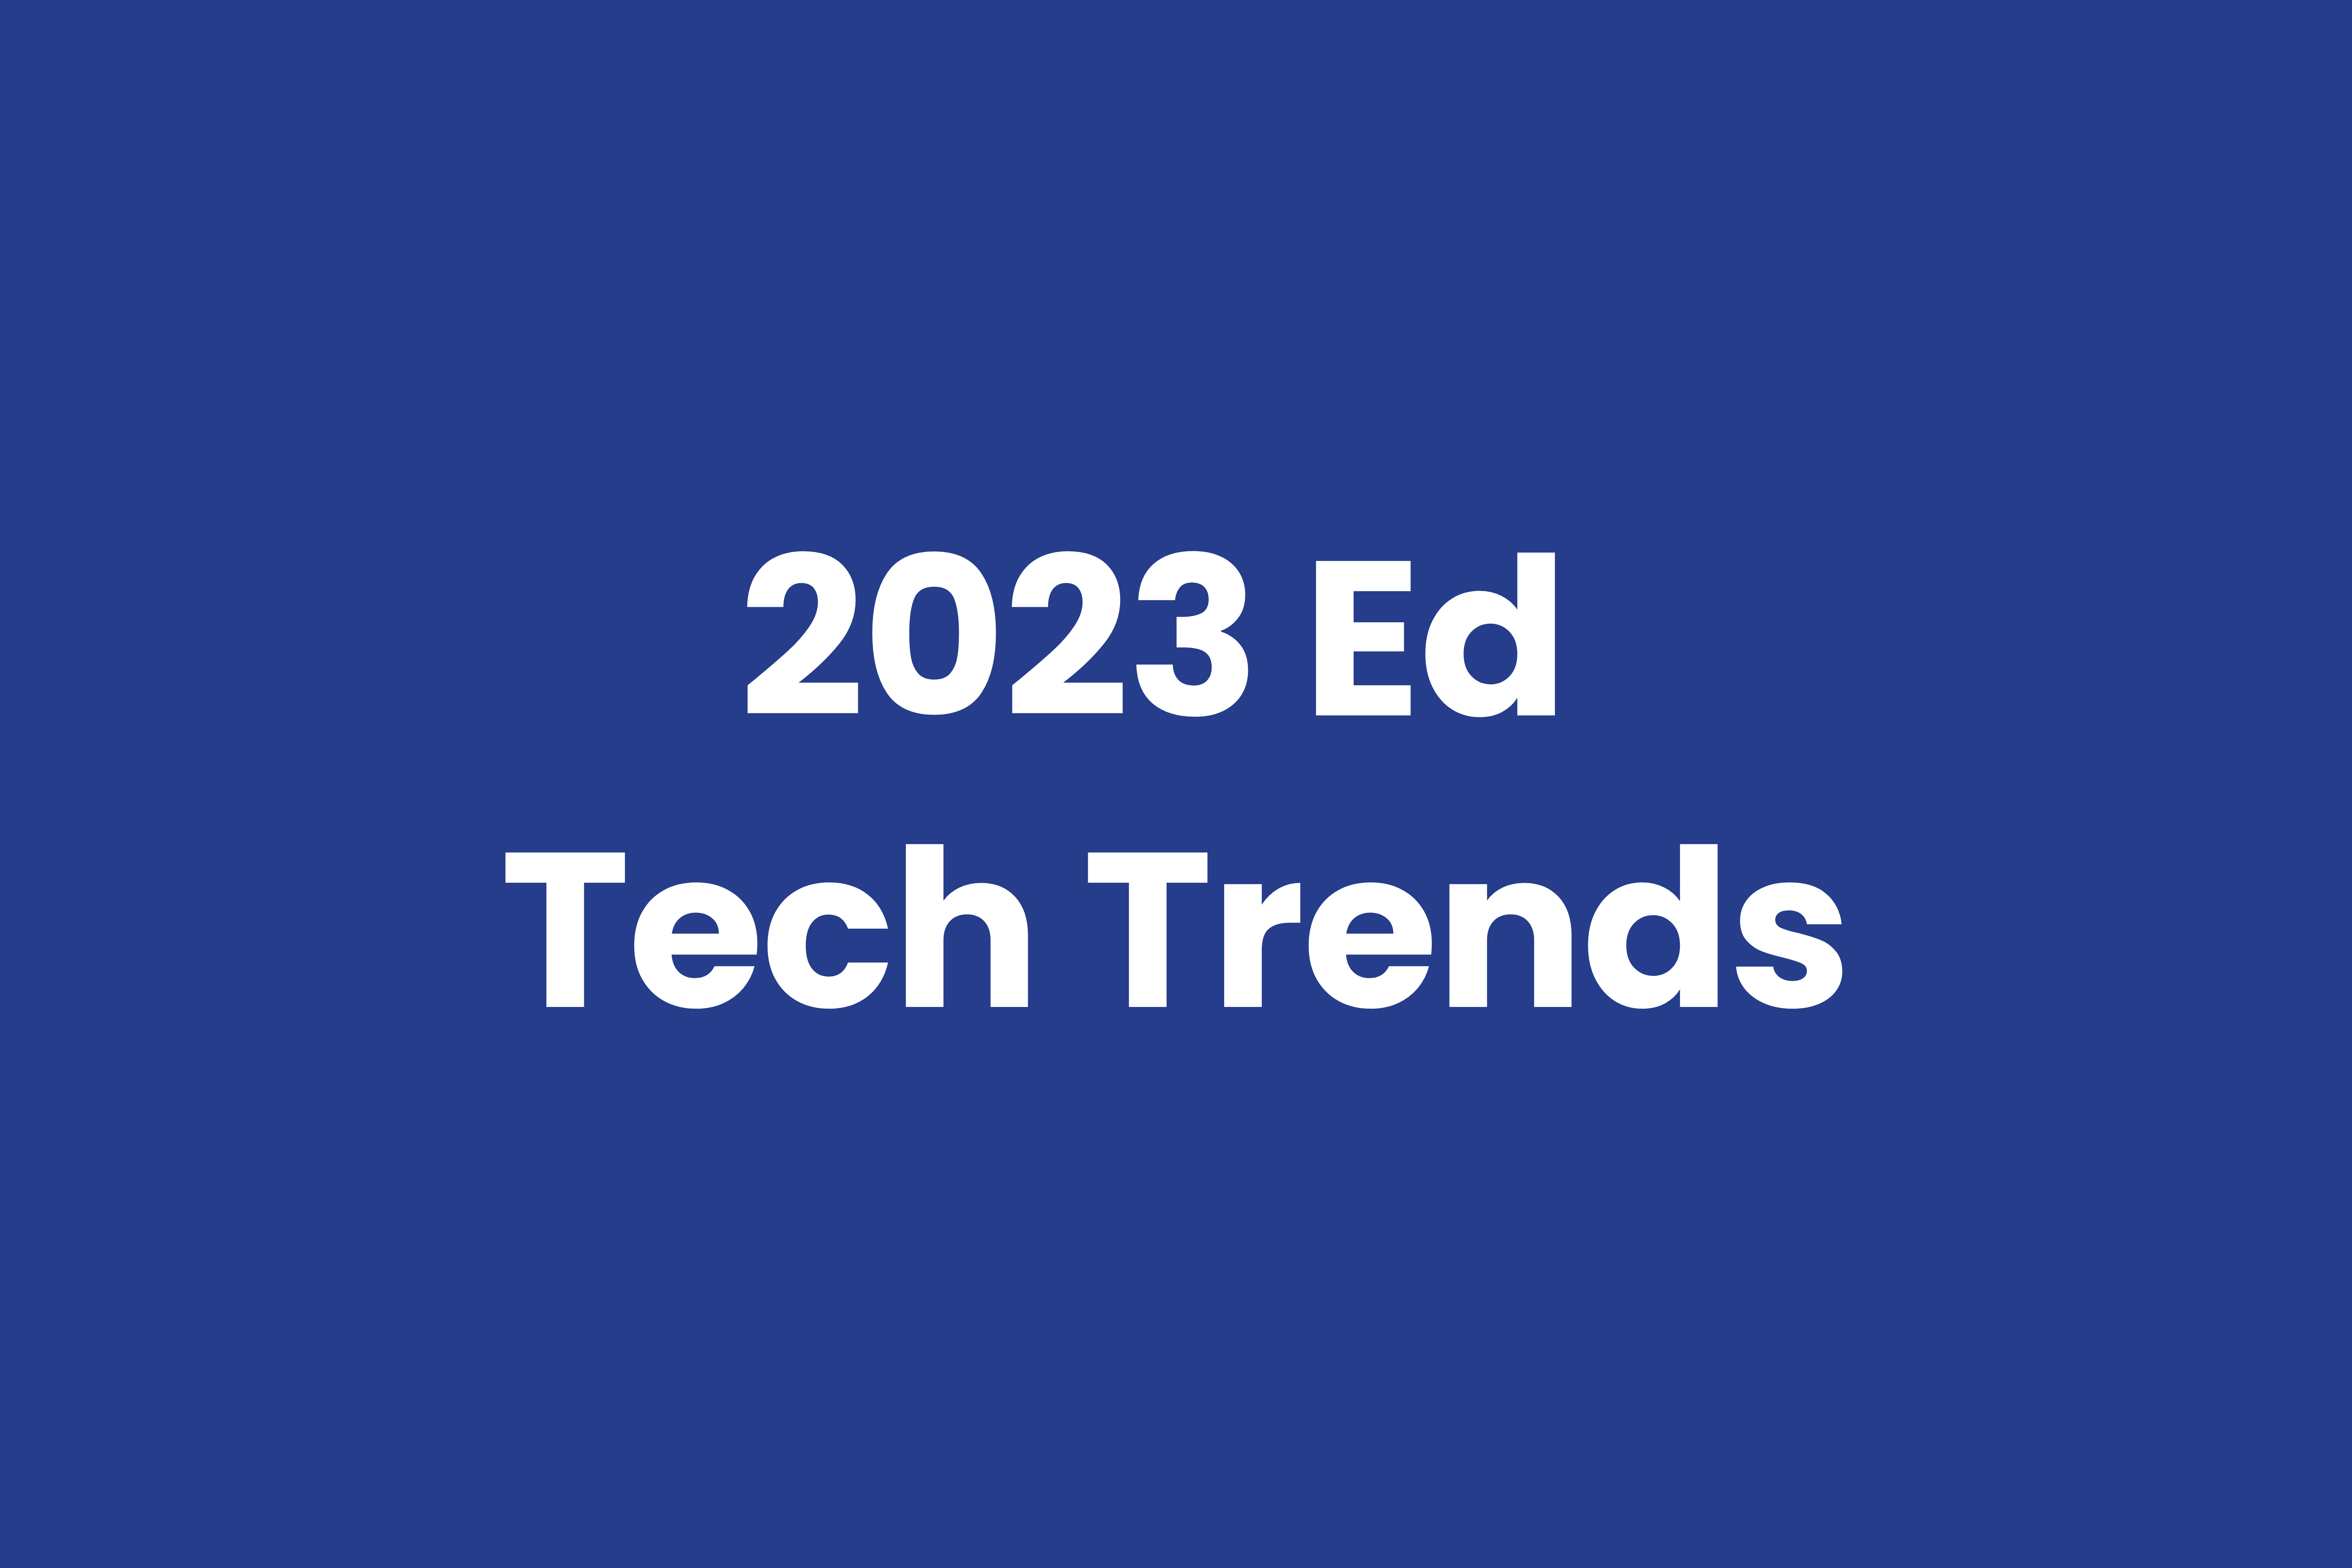 Trends to expect in online education in 2023